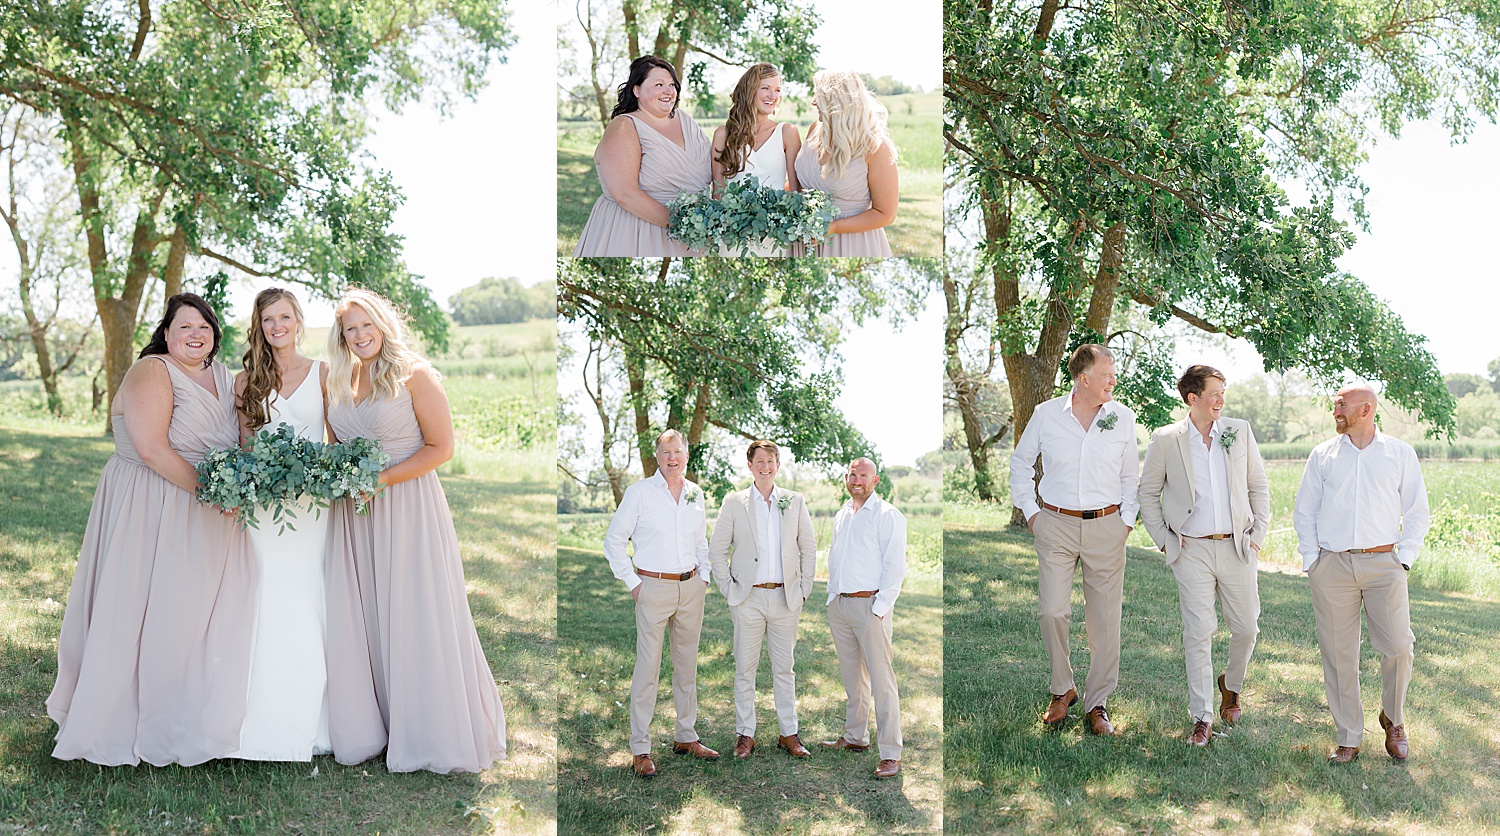 wedding party photos with bridesmaids and groomsman at Kensington Rune Stone Visitor Center